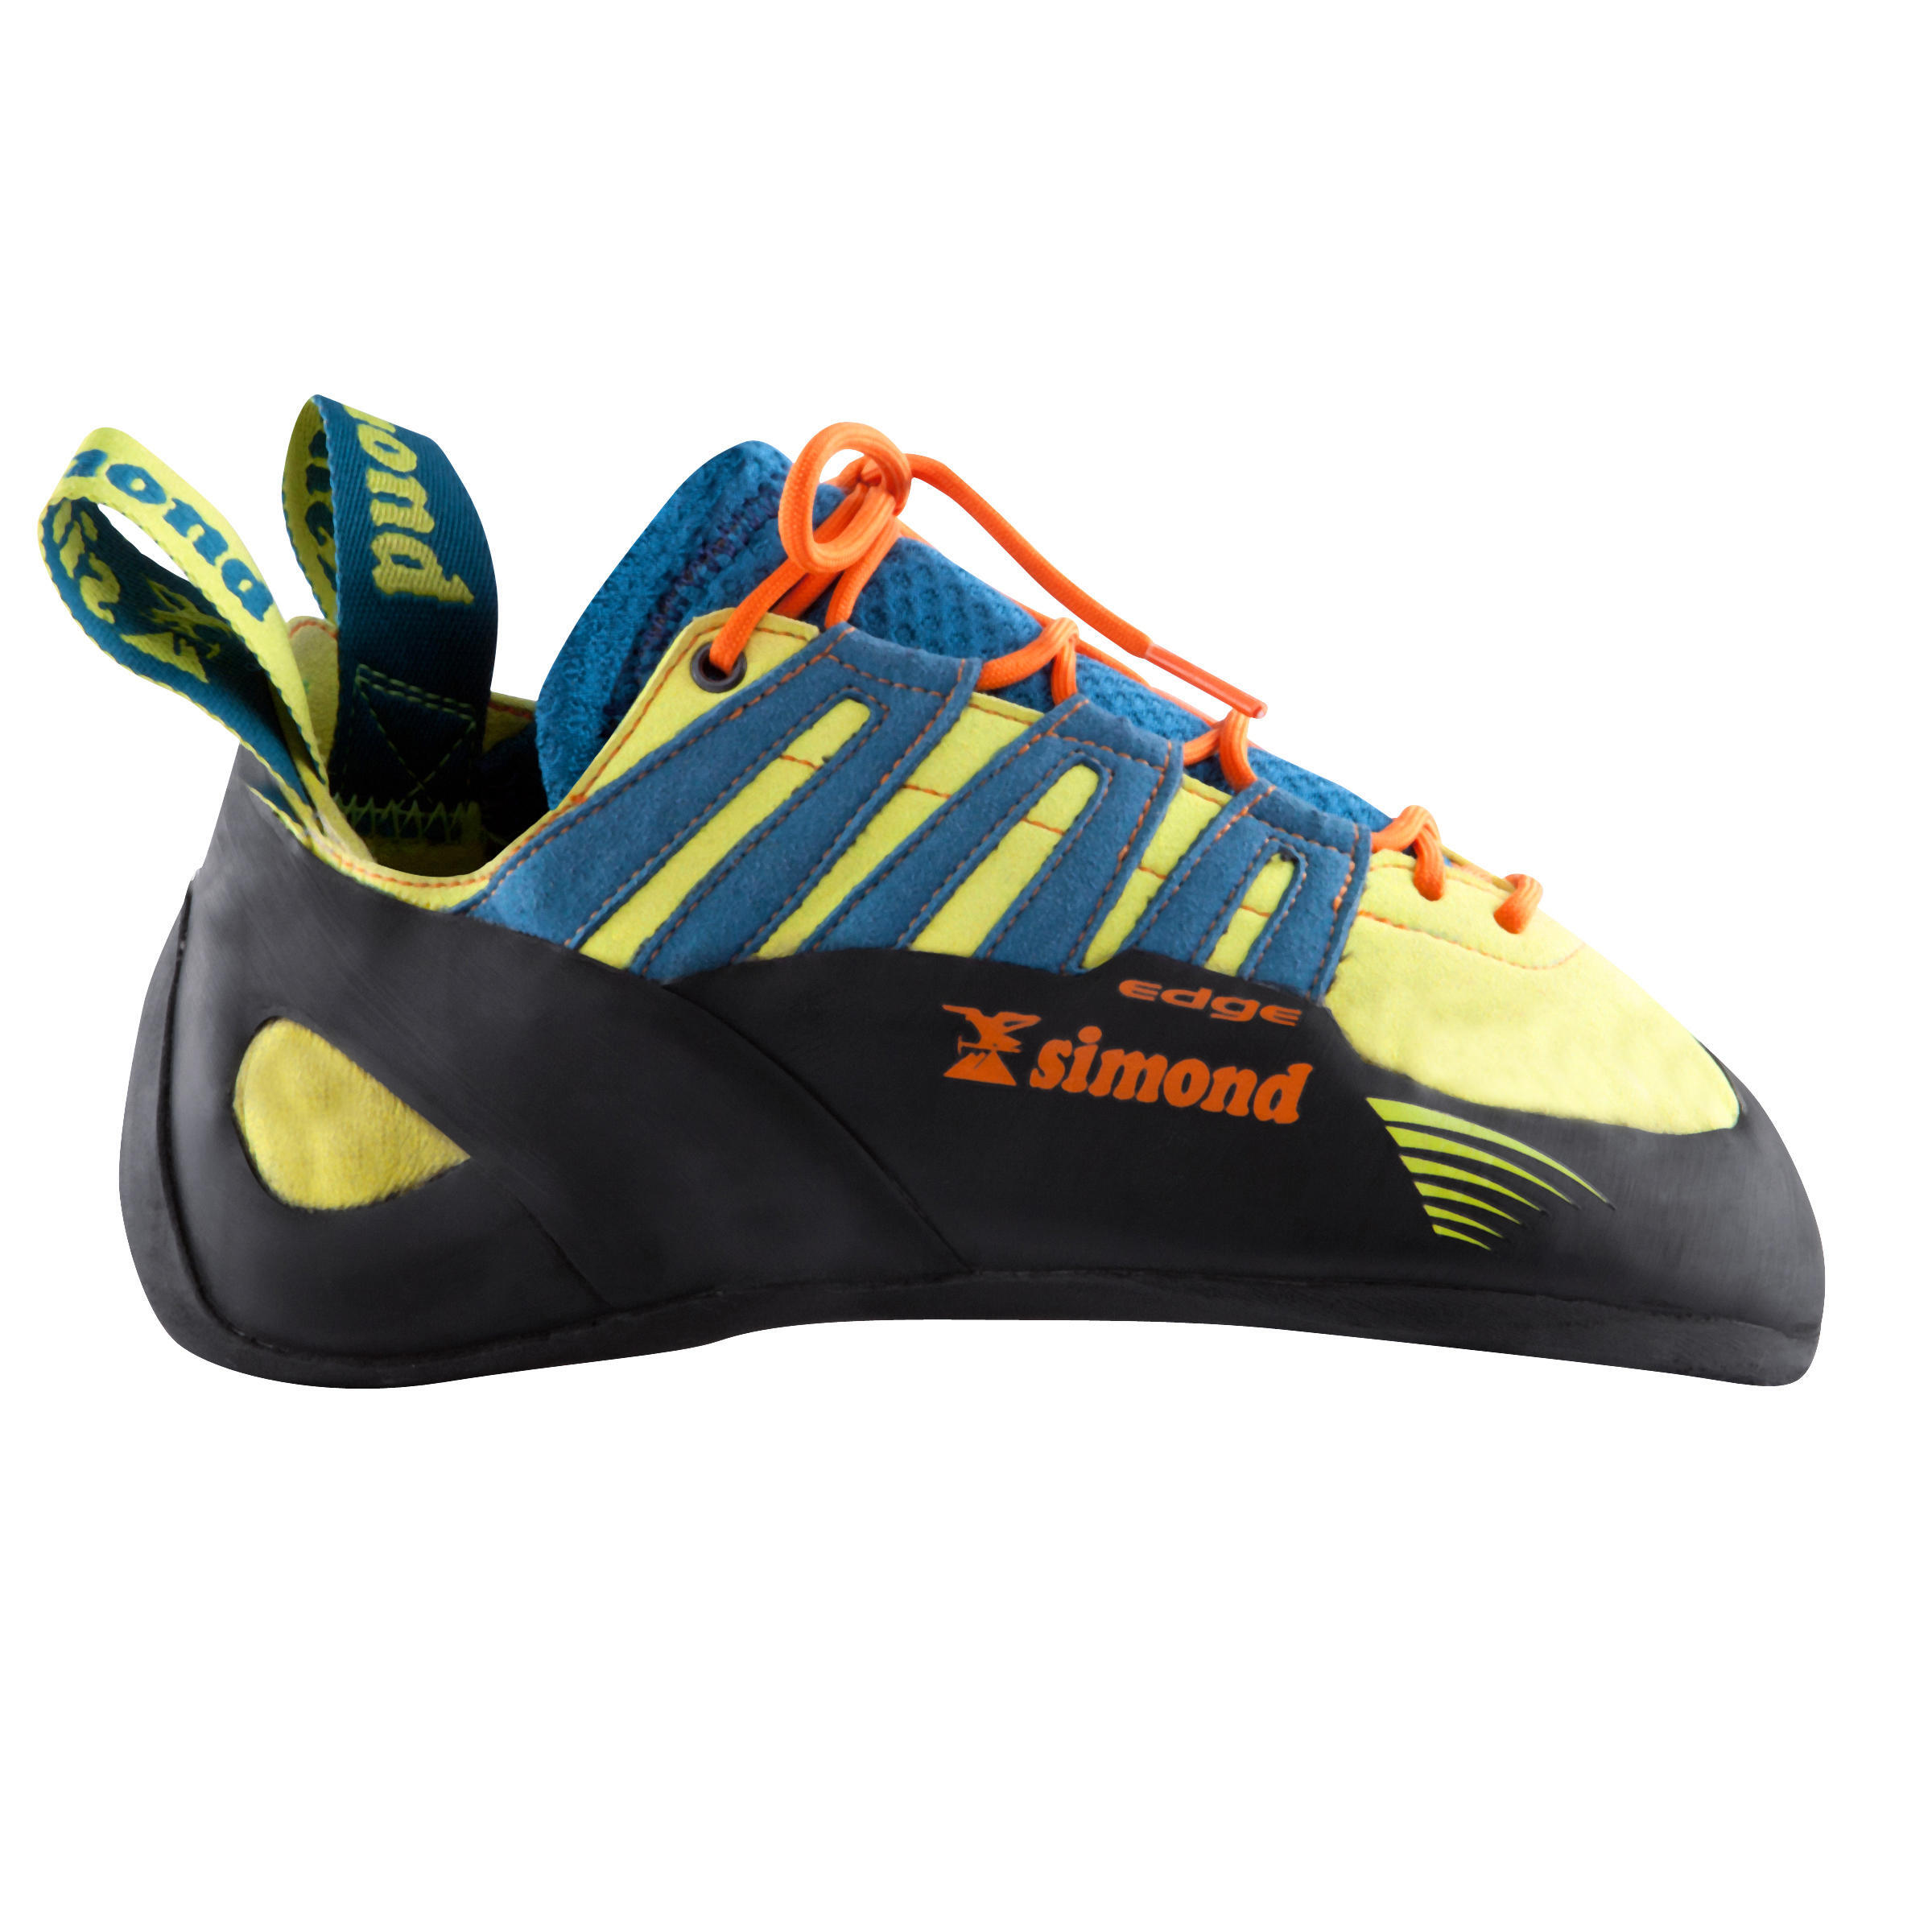 EDGE LACE-UP ADULT CLIMBING SHOES 2/14